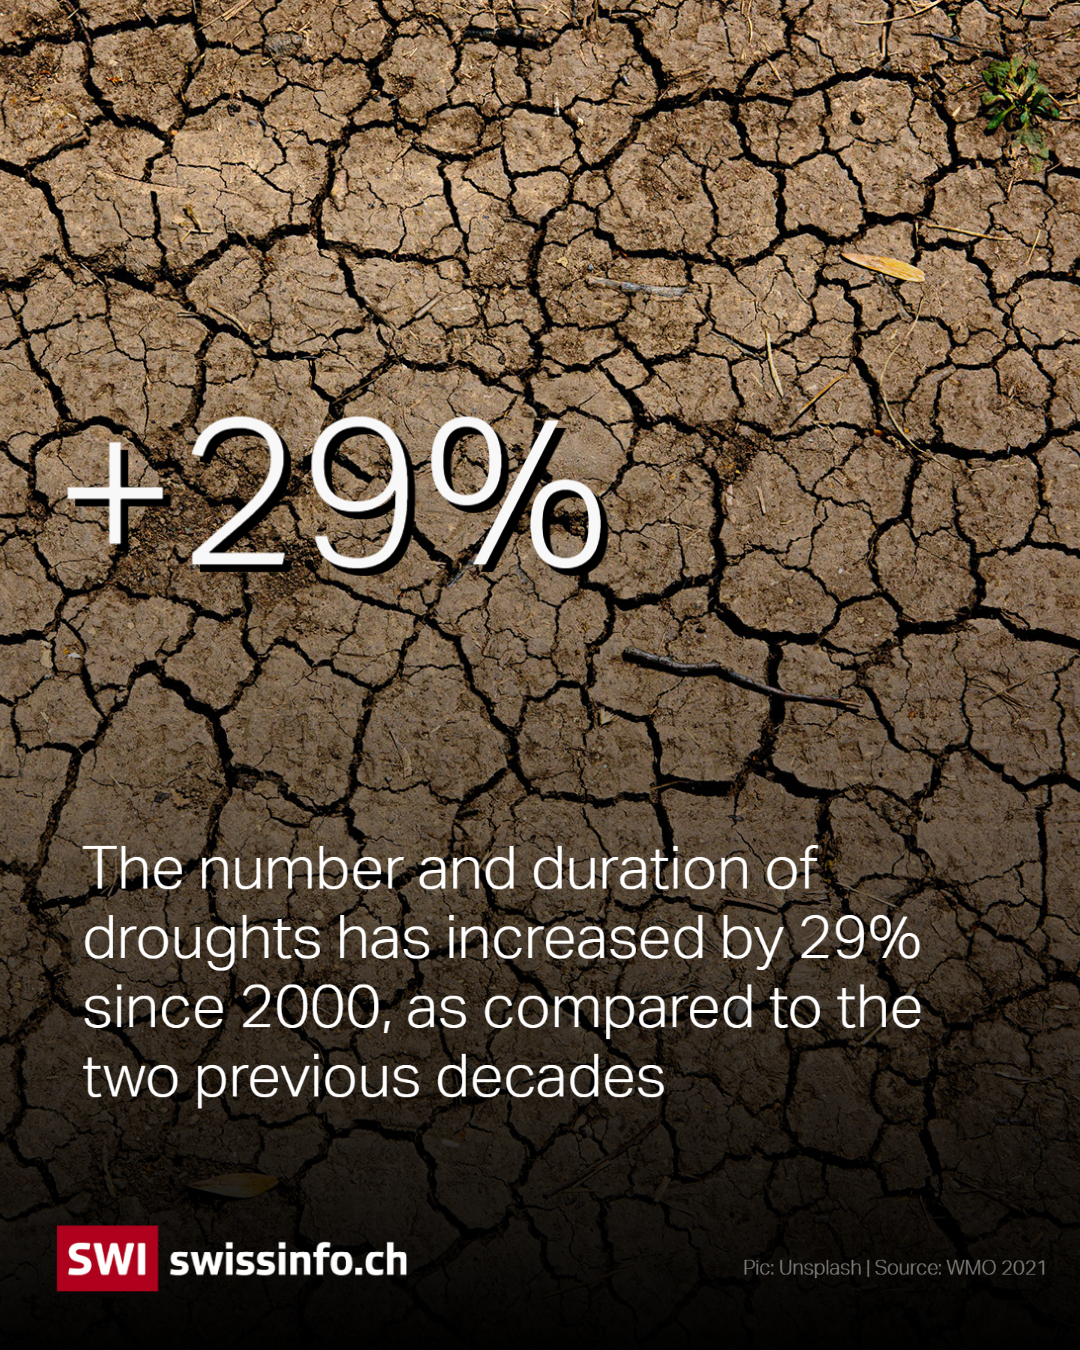 +29 % the number and duration of droughts increased by 29% since 2000, as compared to the two previous decades